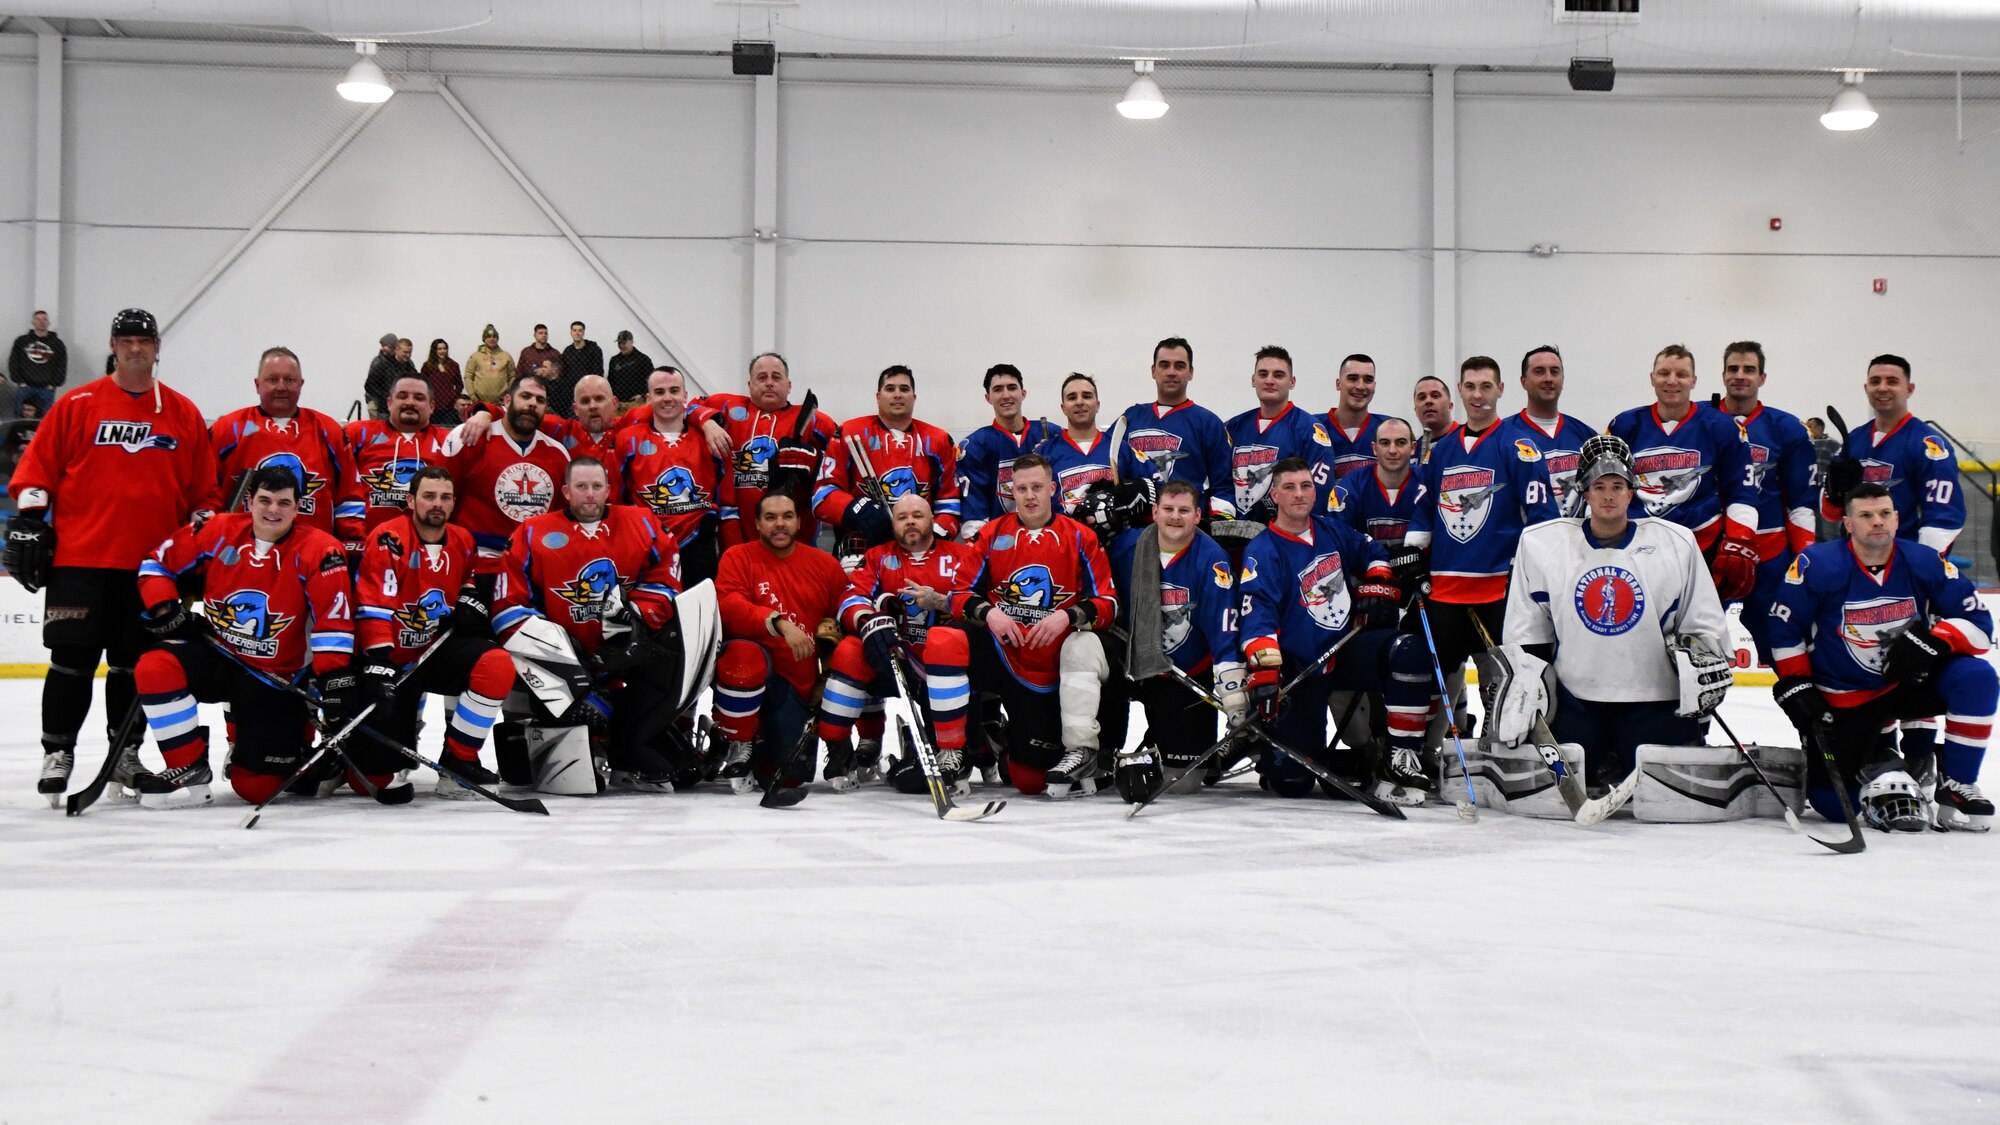 Airmen from the 104th Fighter Wing Barnestormers played hockey against the Springfield Thunderbirds Charity Team in order to raise money for the Skate for the 22 Foundation Feb. 2, 2020, in Westfield, Massachusetts. The hockey game built camaraderie amongst Airmen and allowed them with an opportunity to support military veterans. (U.S. Air National Guard photo by Airman 1st Class Sara Kolinski) (U.S. Air National Guard photo by Airman 1st Class Sara Kolinski)